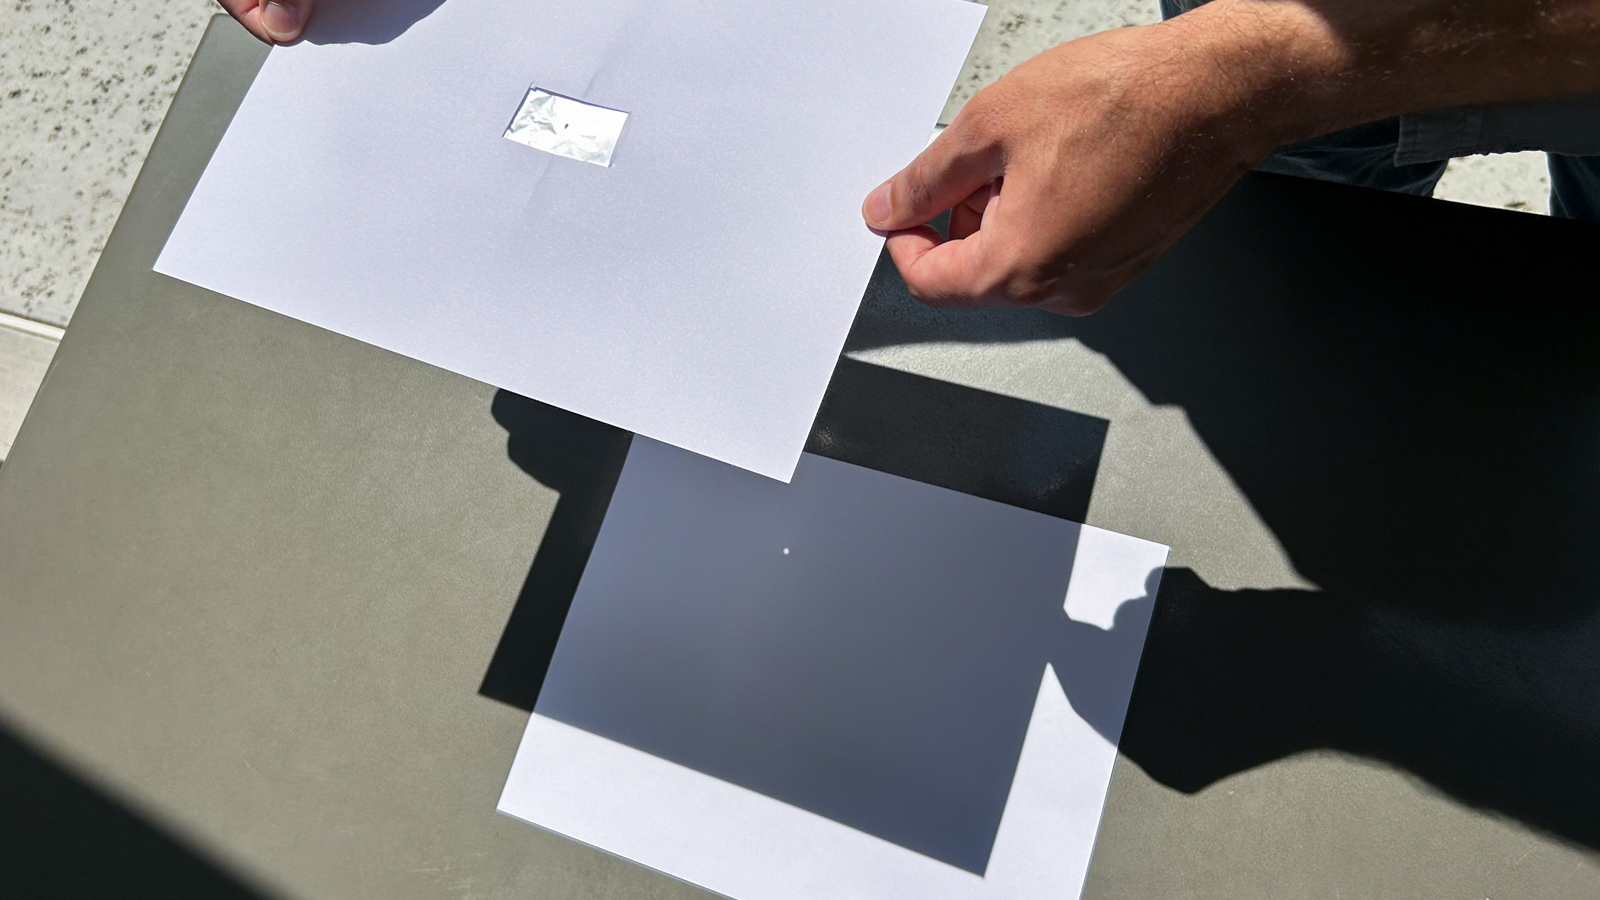 Student Project: How to Make a Pinhole Camera